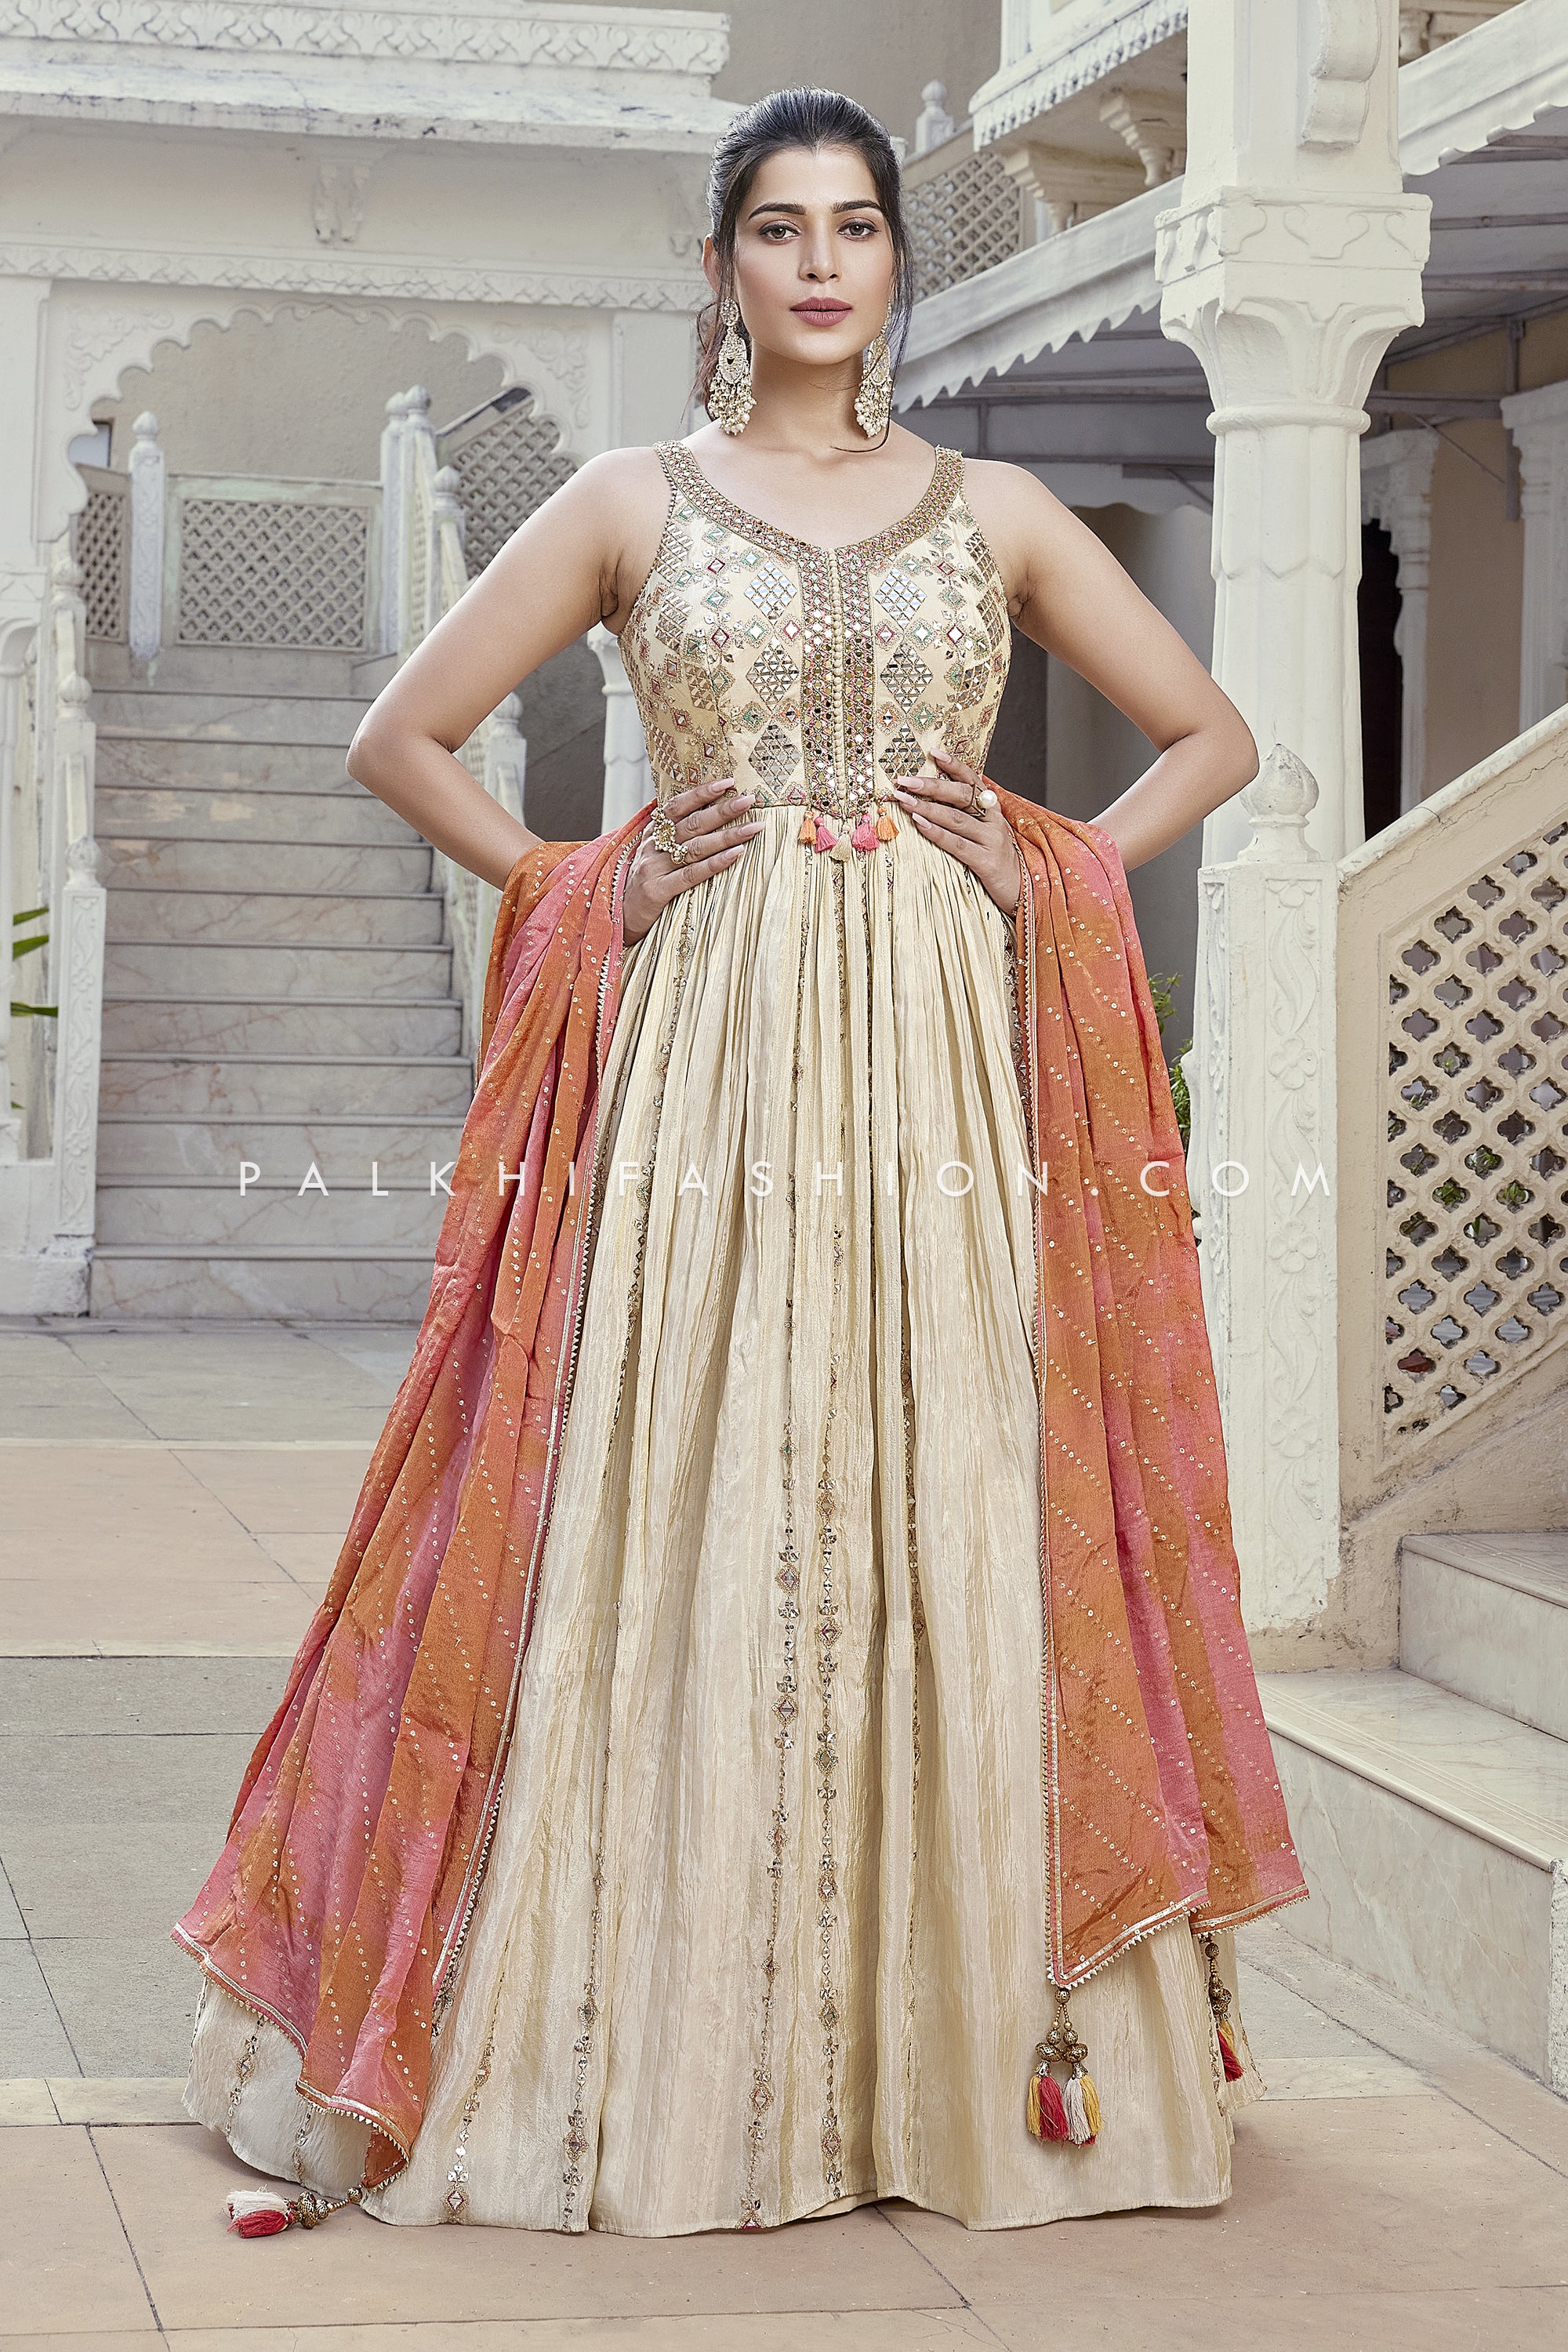 Indian Gowns for sale: Gown for women online | Indian Gowns online